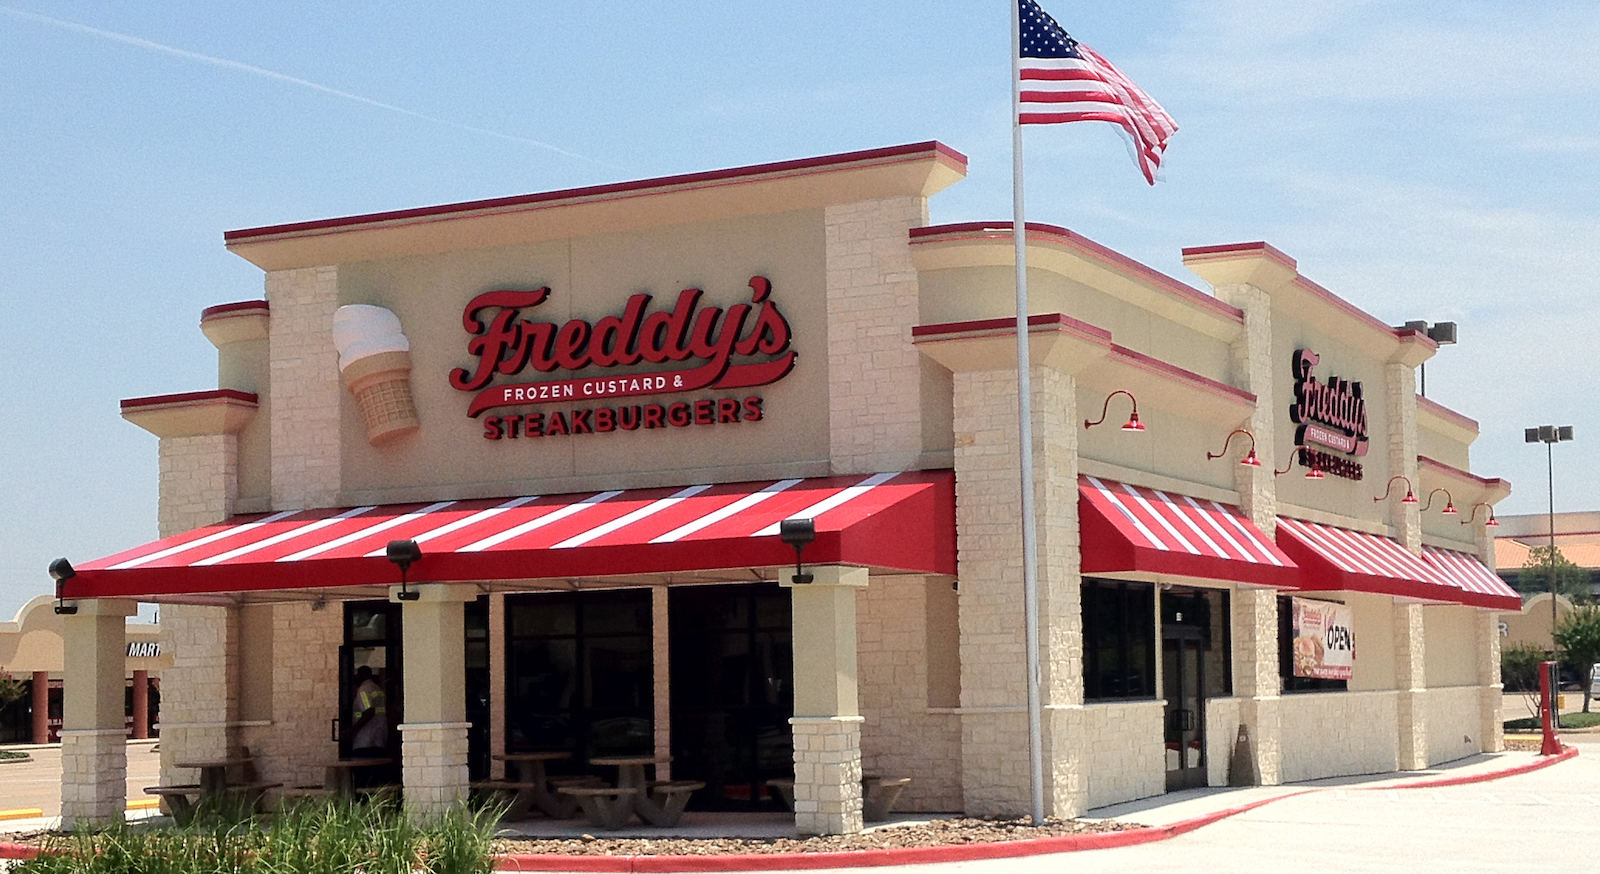 Freddys Has Become A Major Burger Franchise Success Across The US